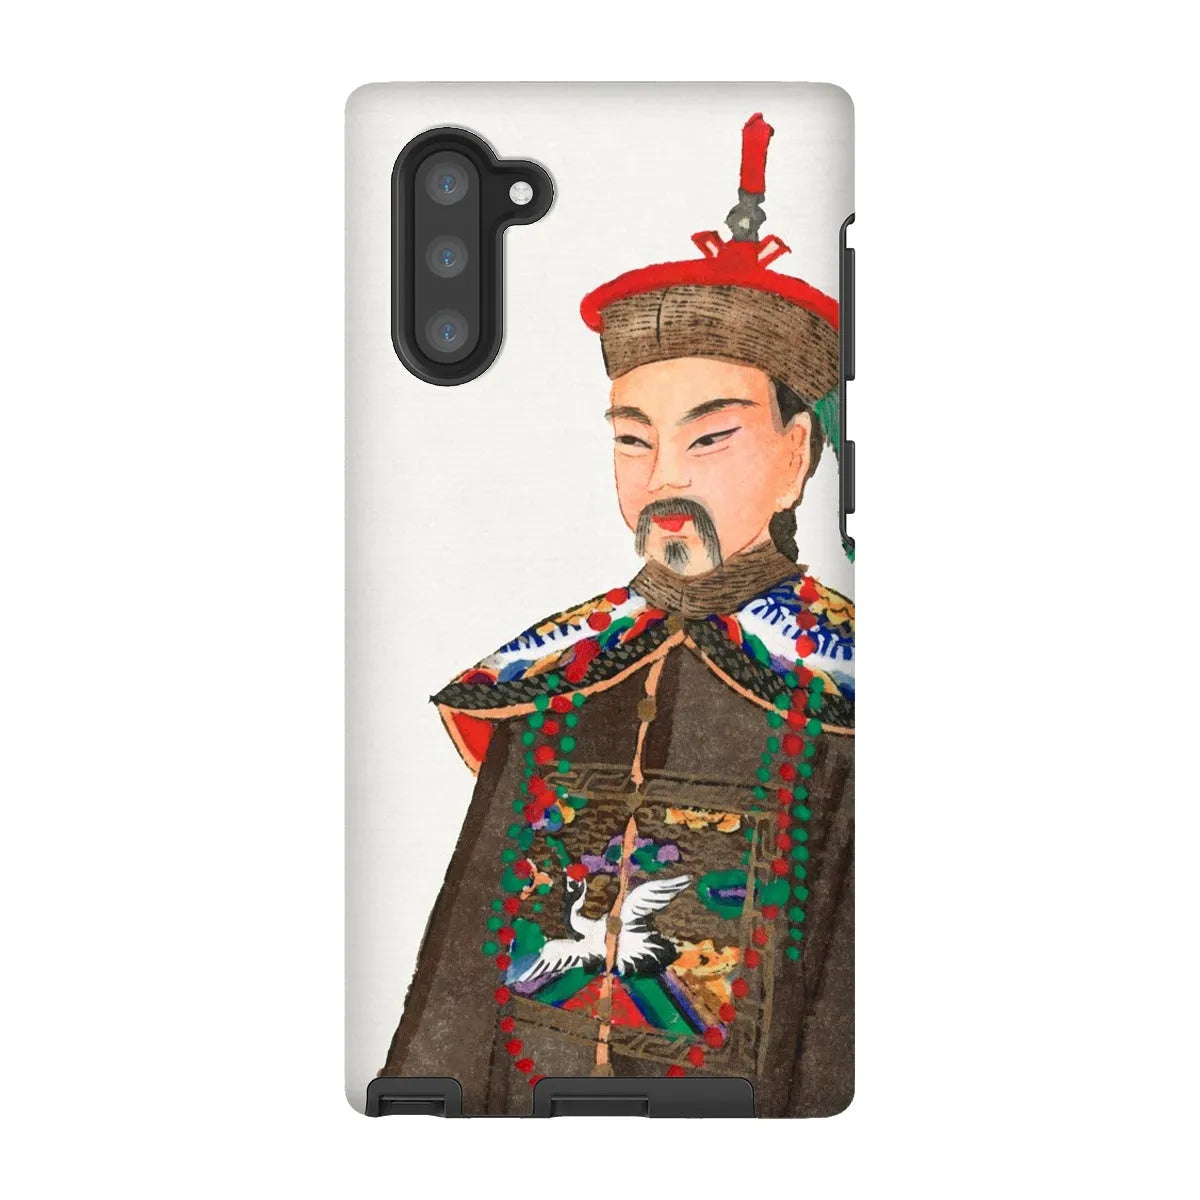 Nobleman At Court - Chinese Aesthetic Manchu Art Phone Case - Samsung Galaxy Note 10 / Matte - Mobile Phone Cases